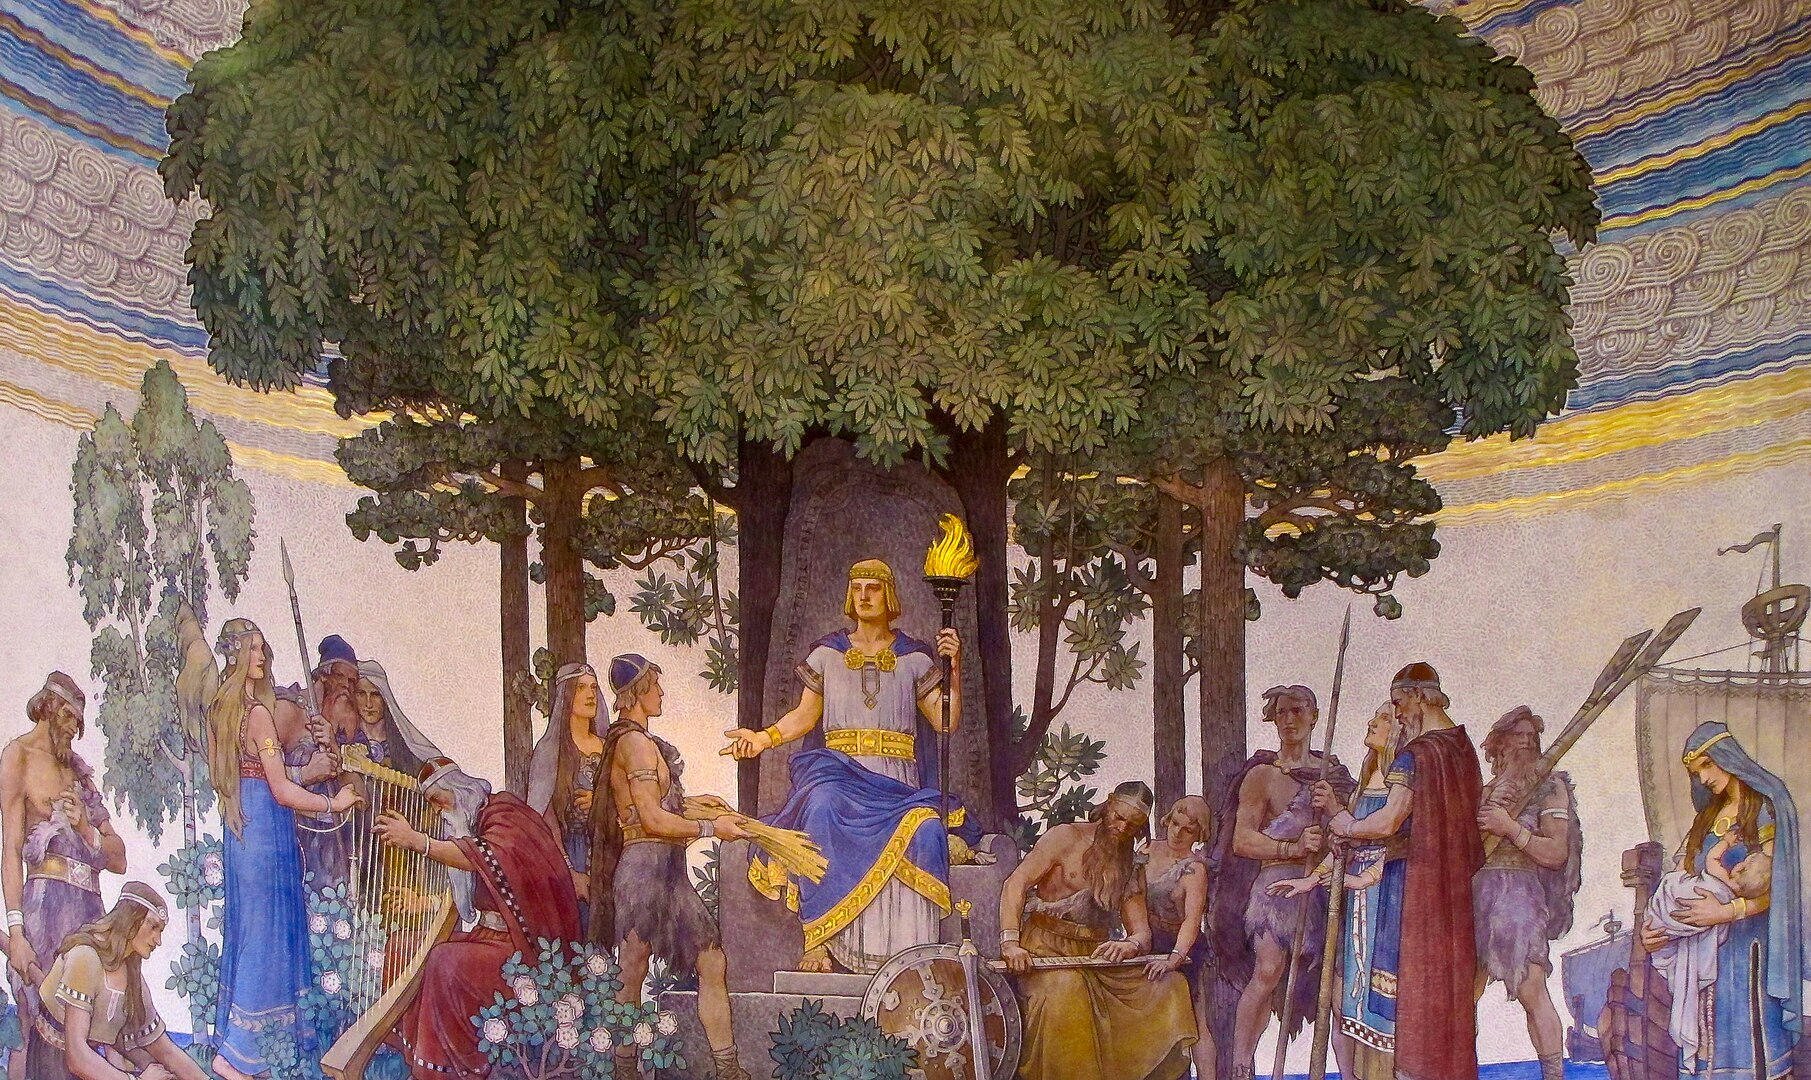 A god holding a torch standing under a tree surrounded by various figures